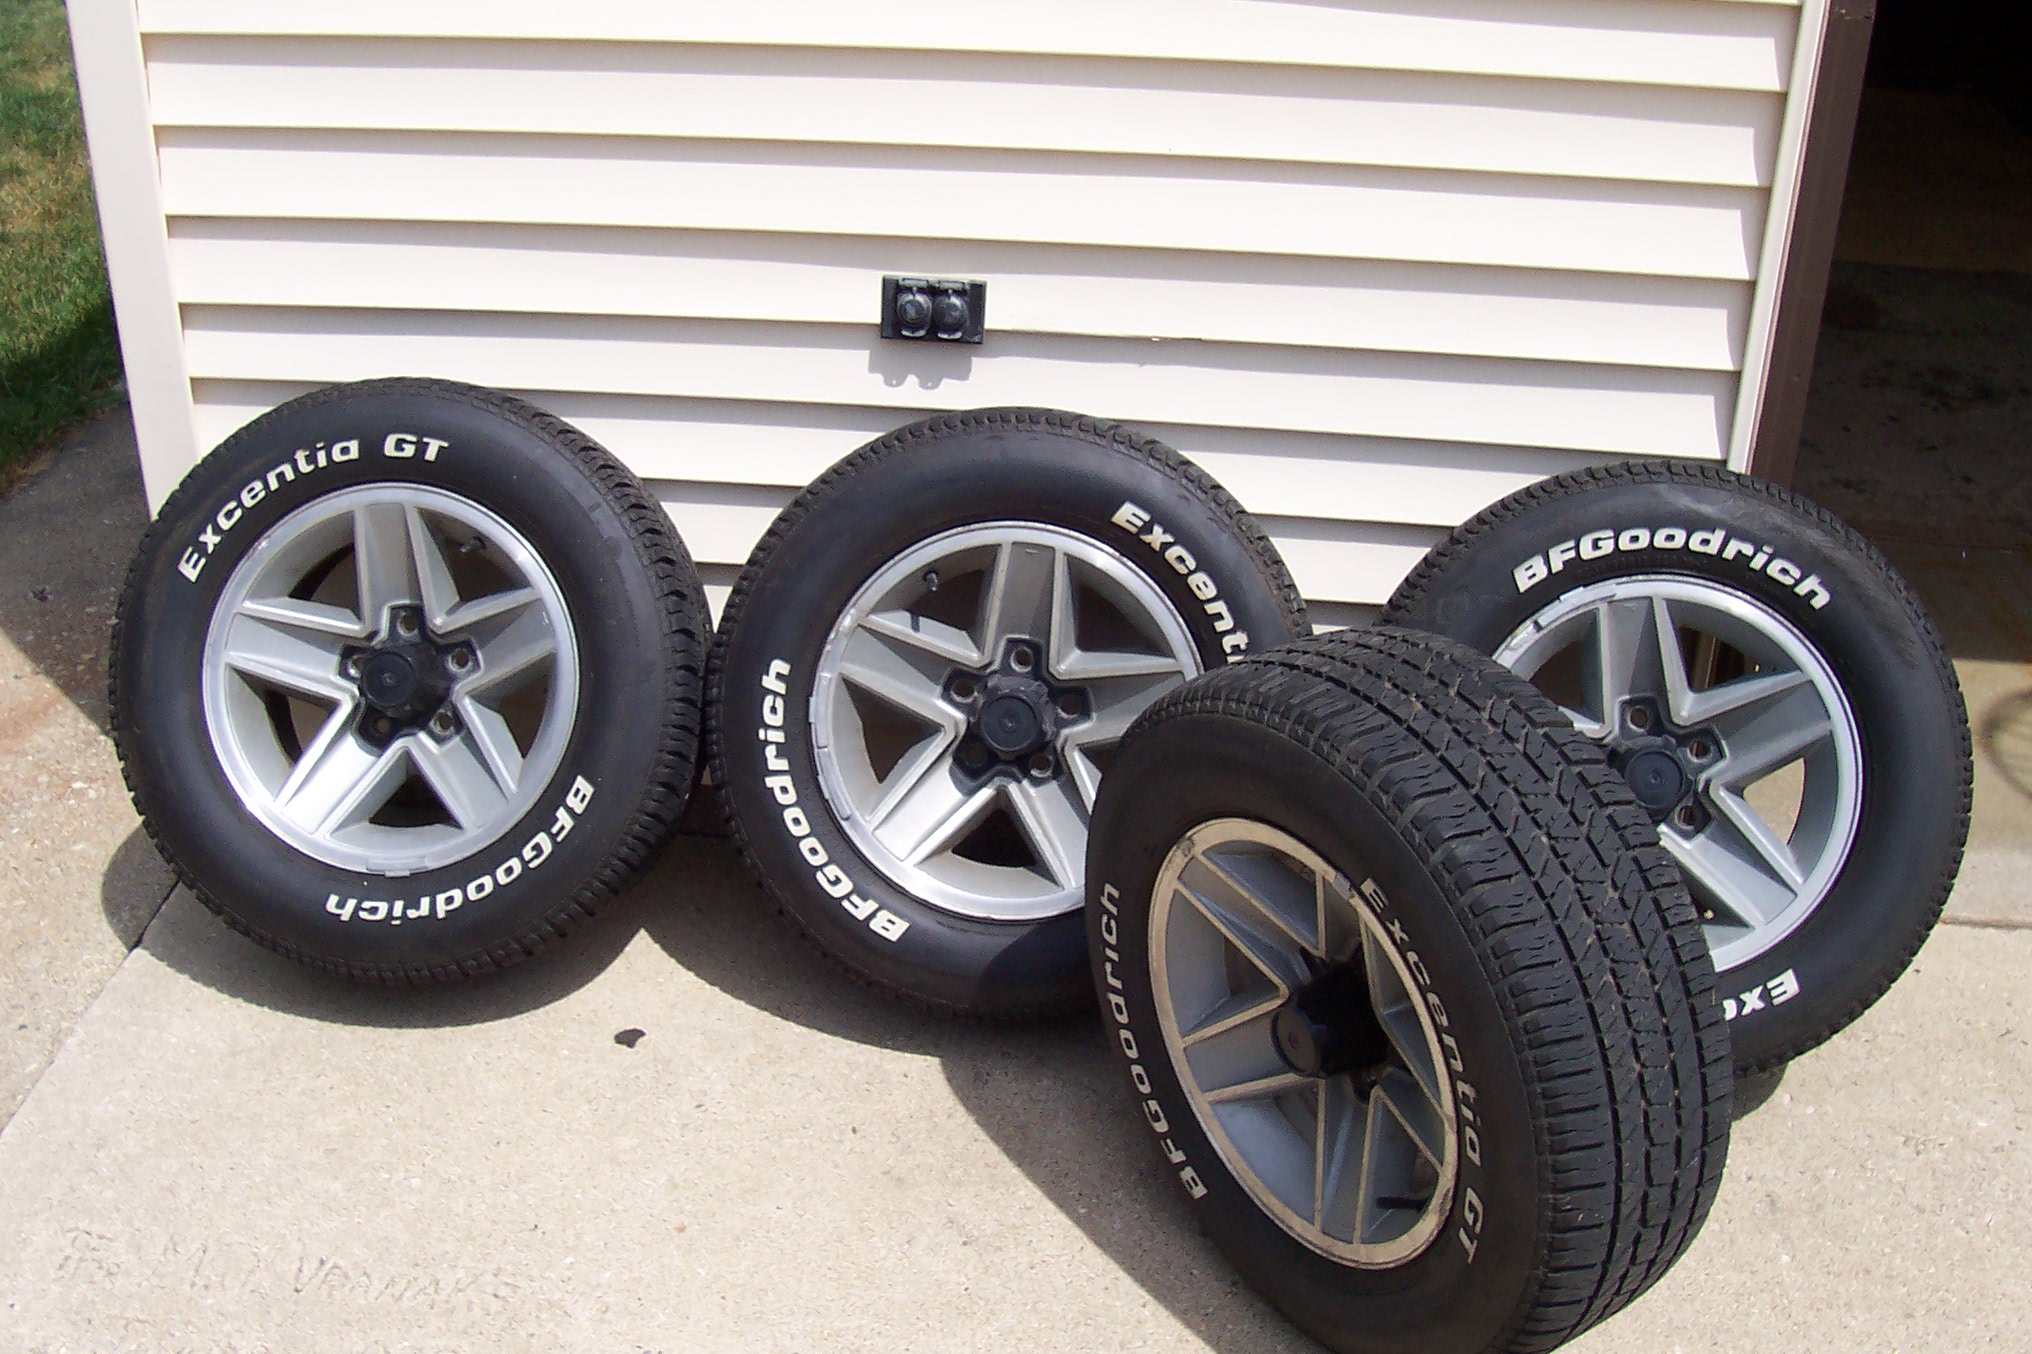 84 Z28 Came With Iroc Rims Third Generation F Body.